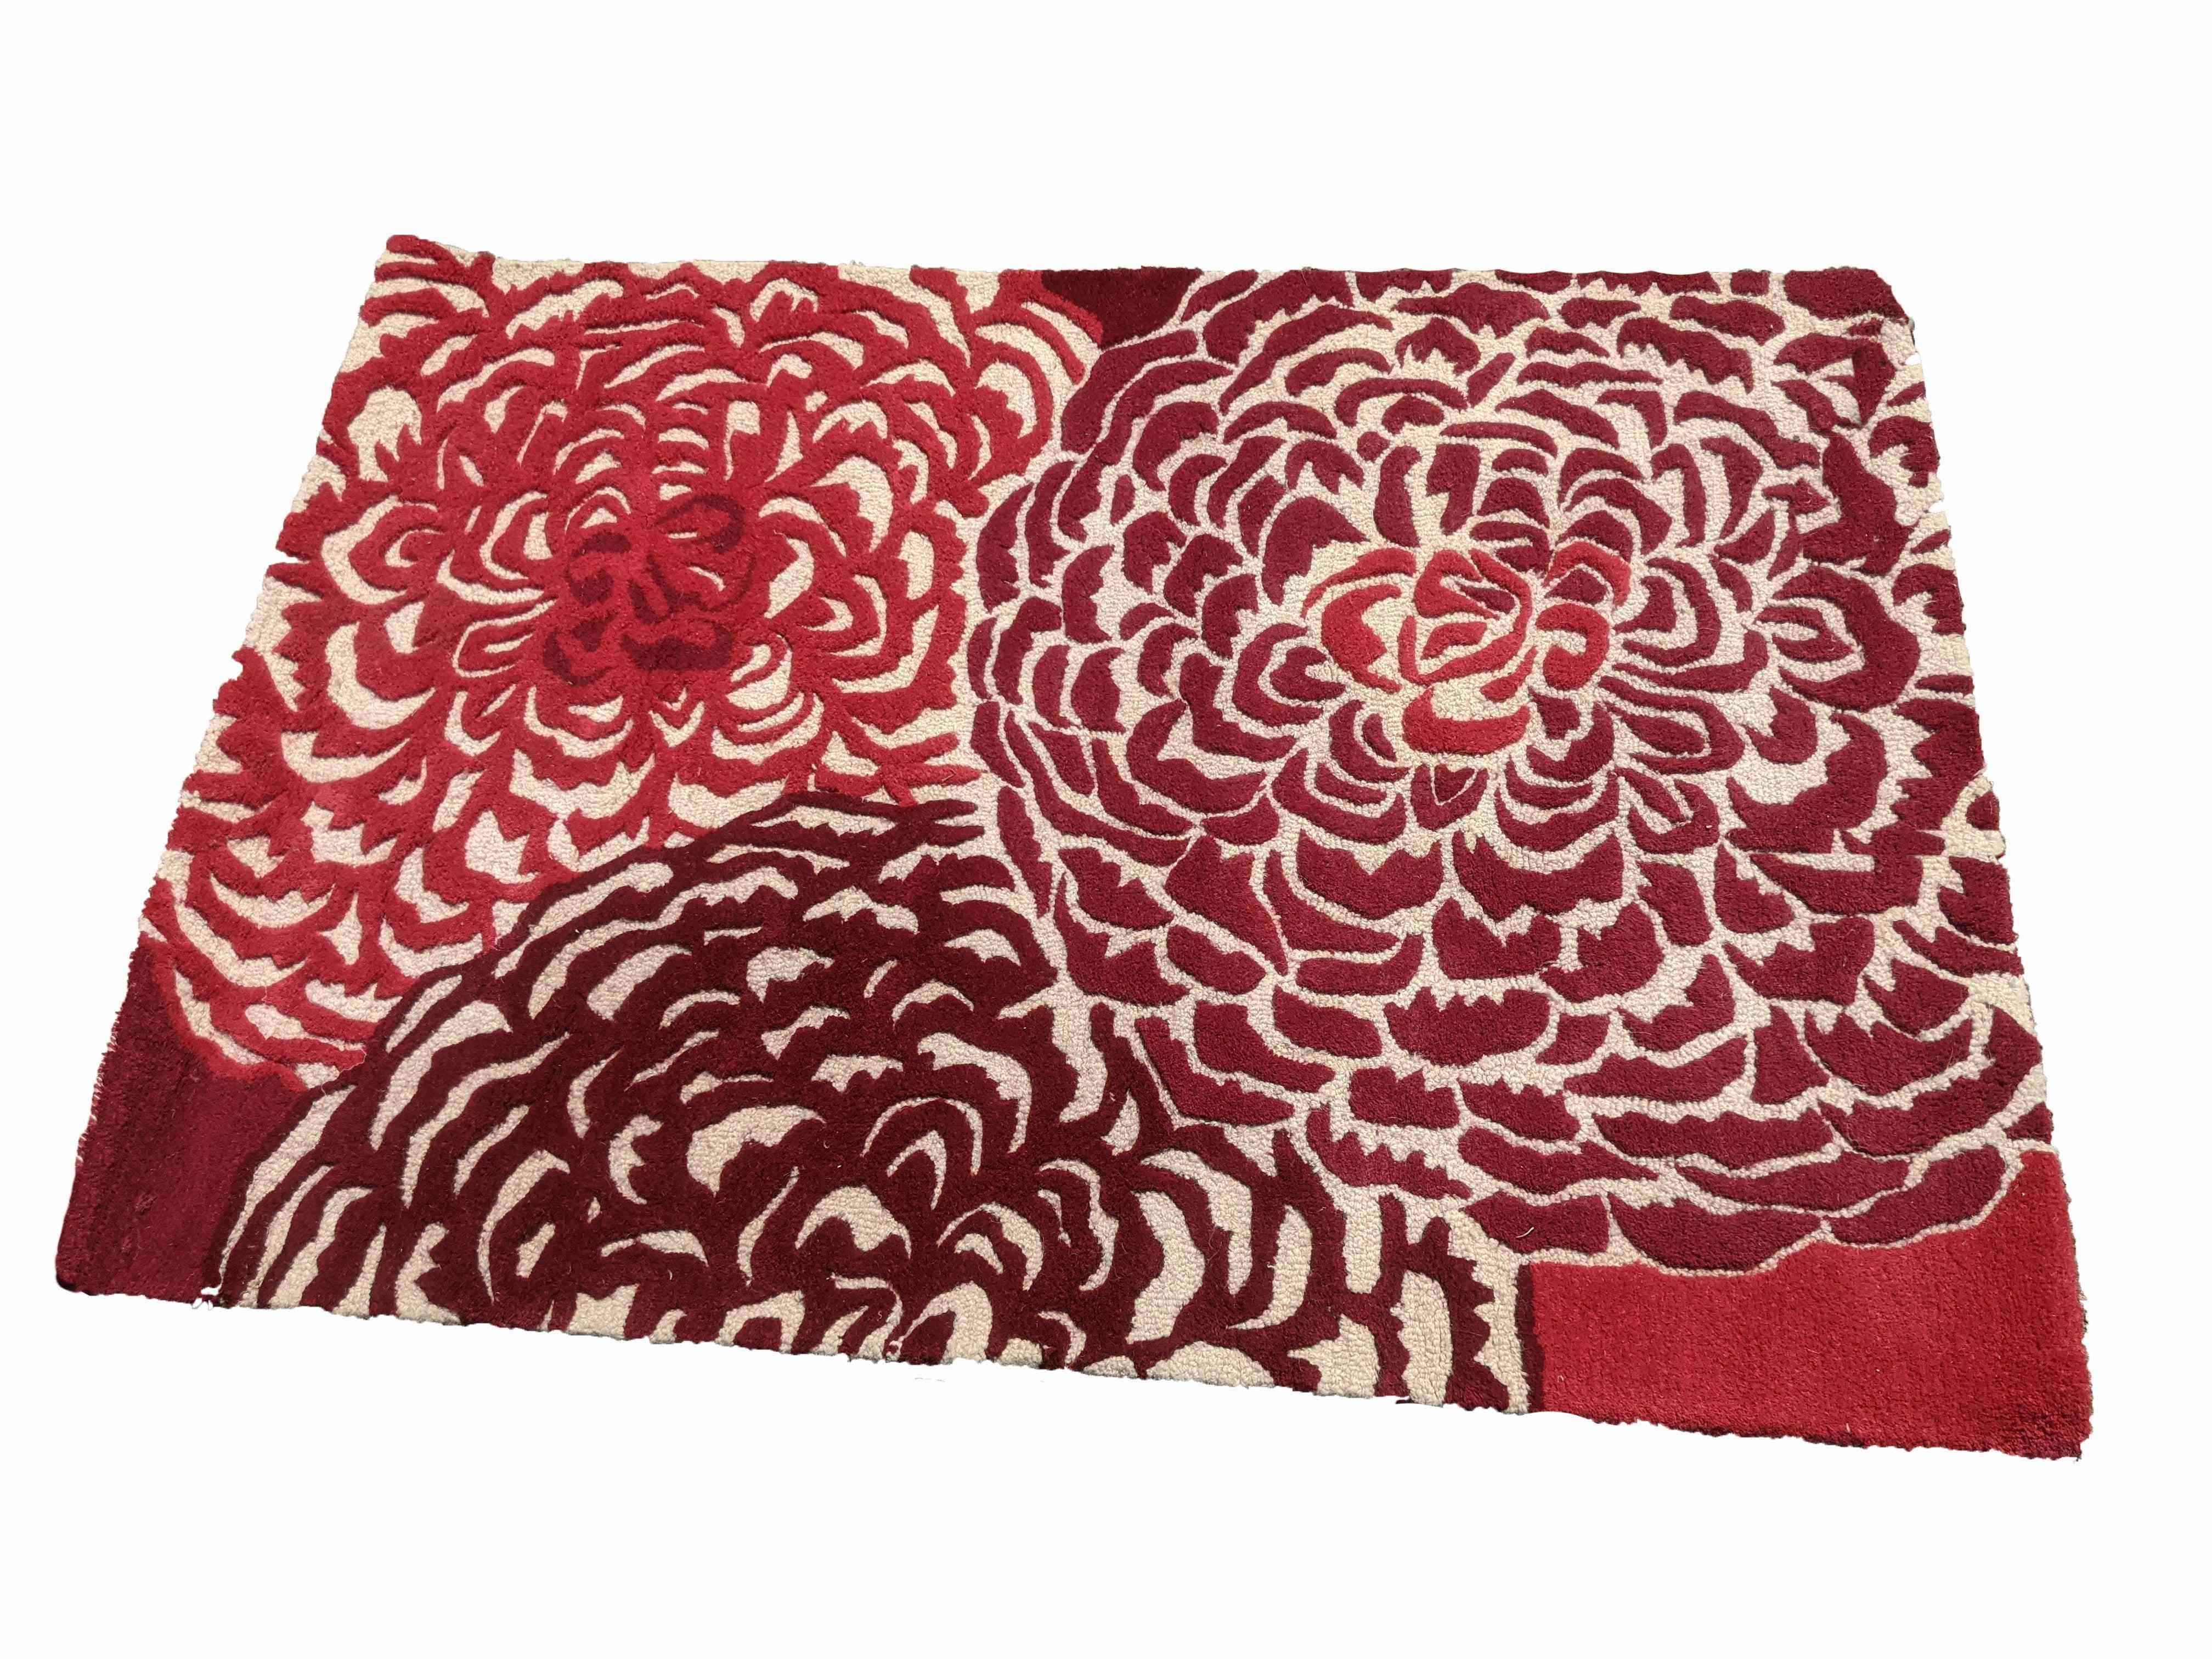 173 x 122 cm Hand tuffted Red Rug - Rugmaster